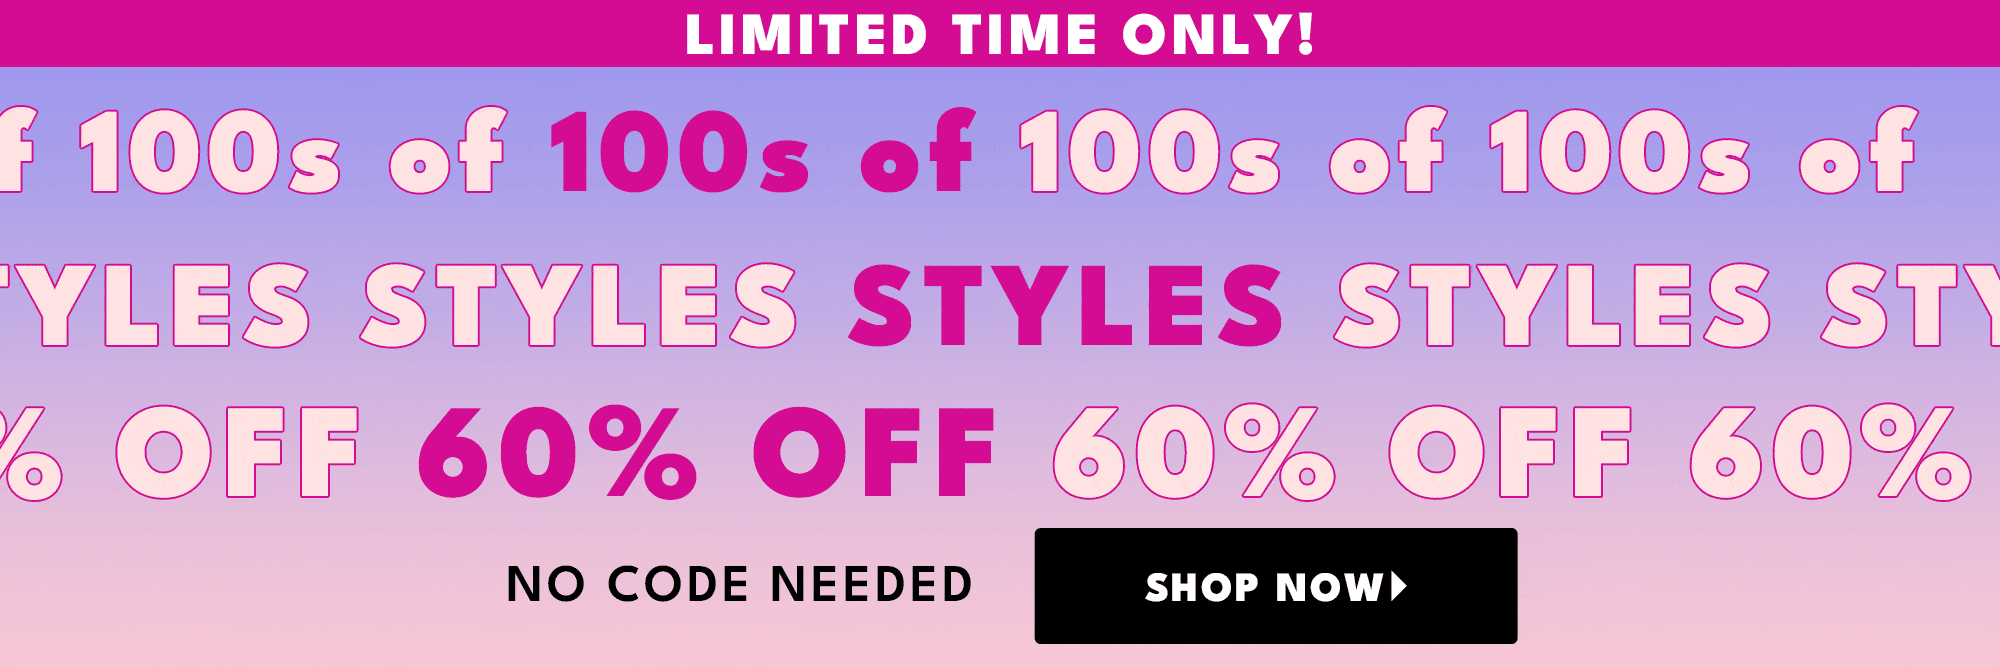 limited time only! 100s of styles 60% off shop now